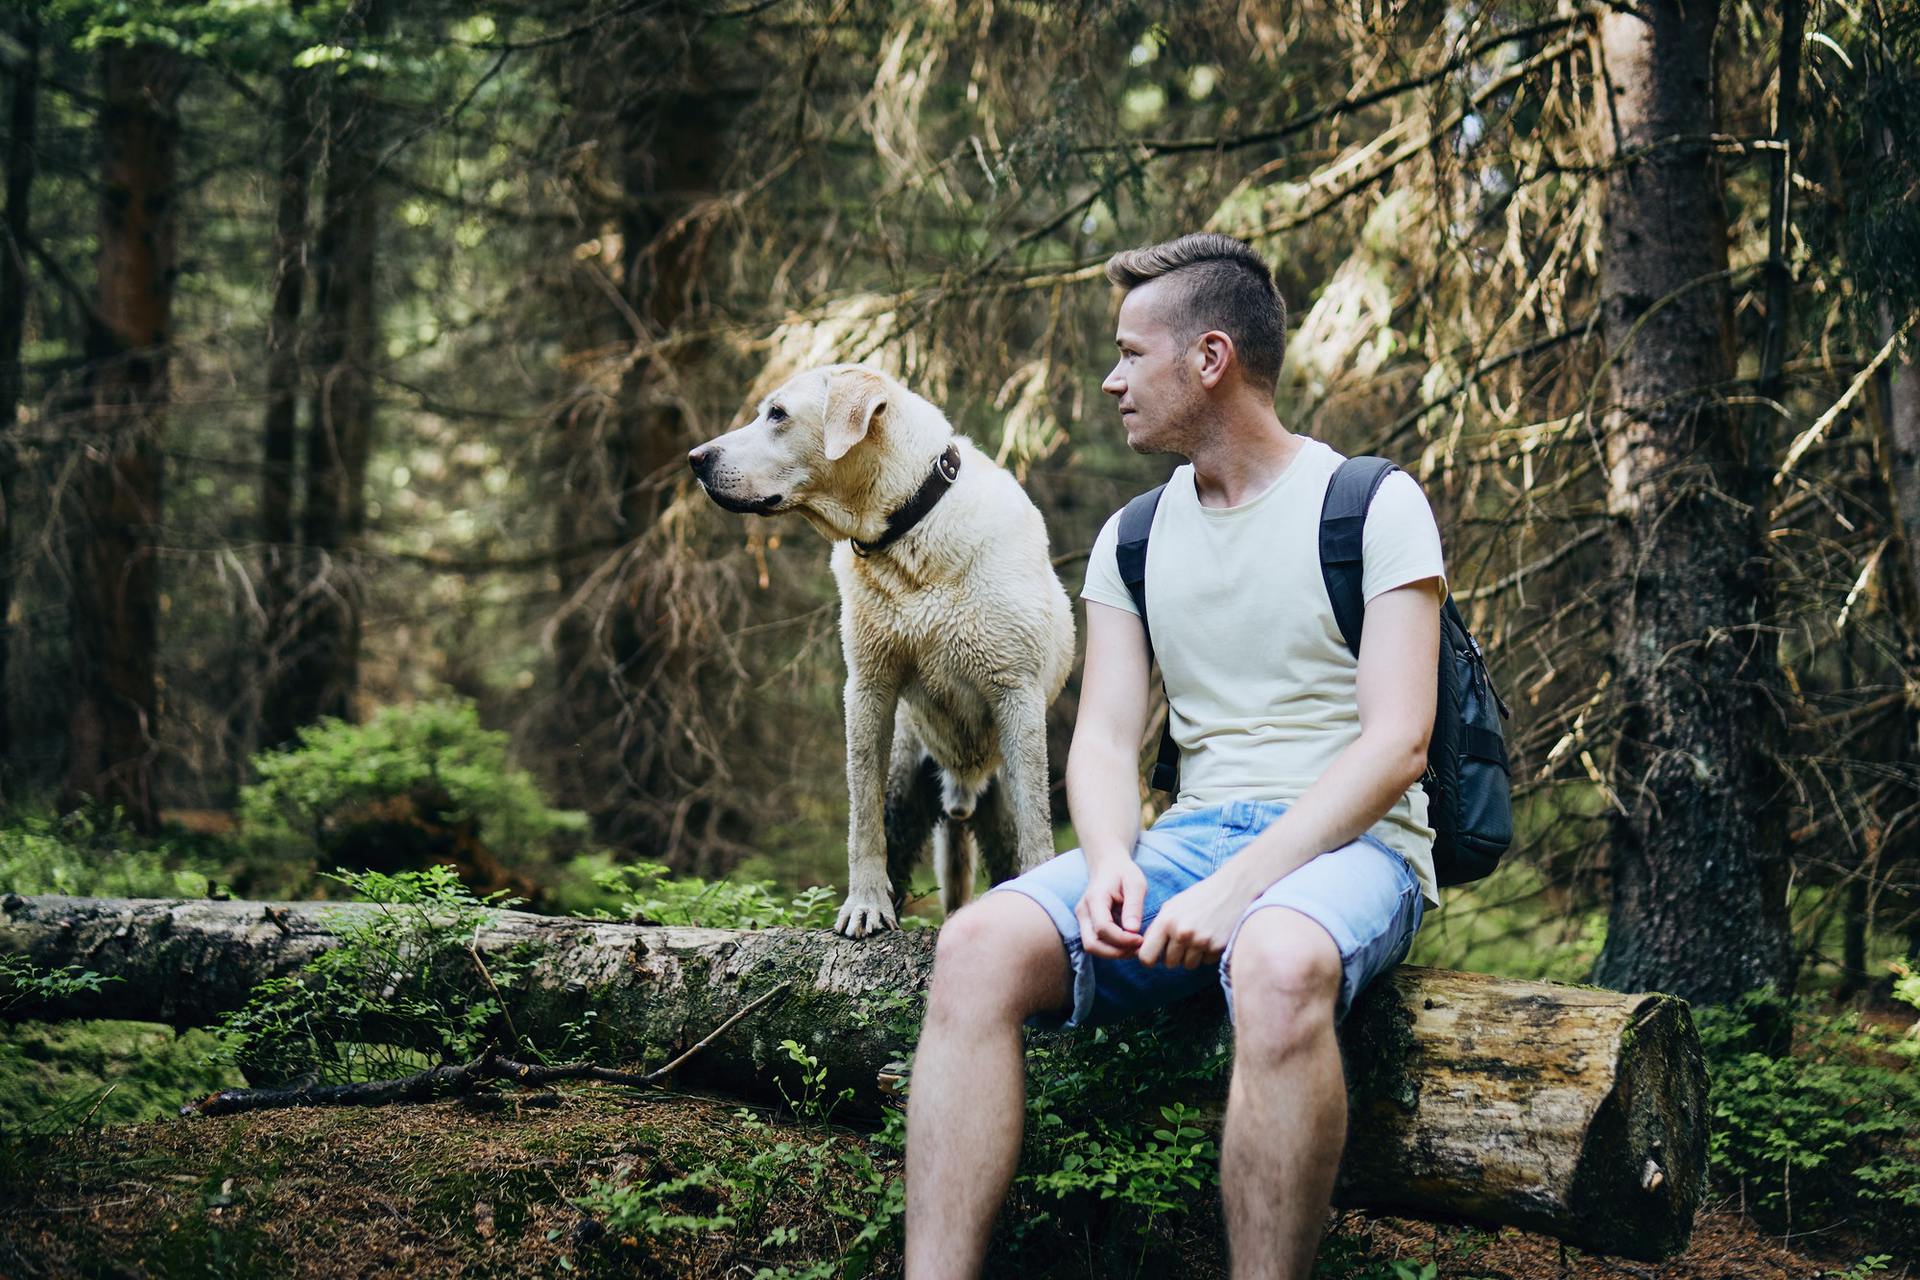 Man with dog in forest